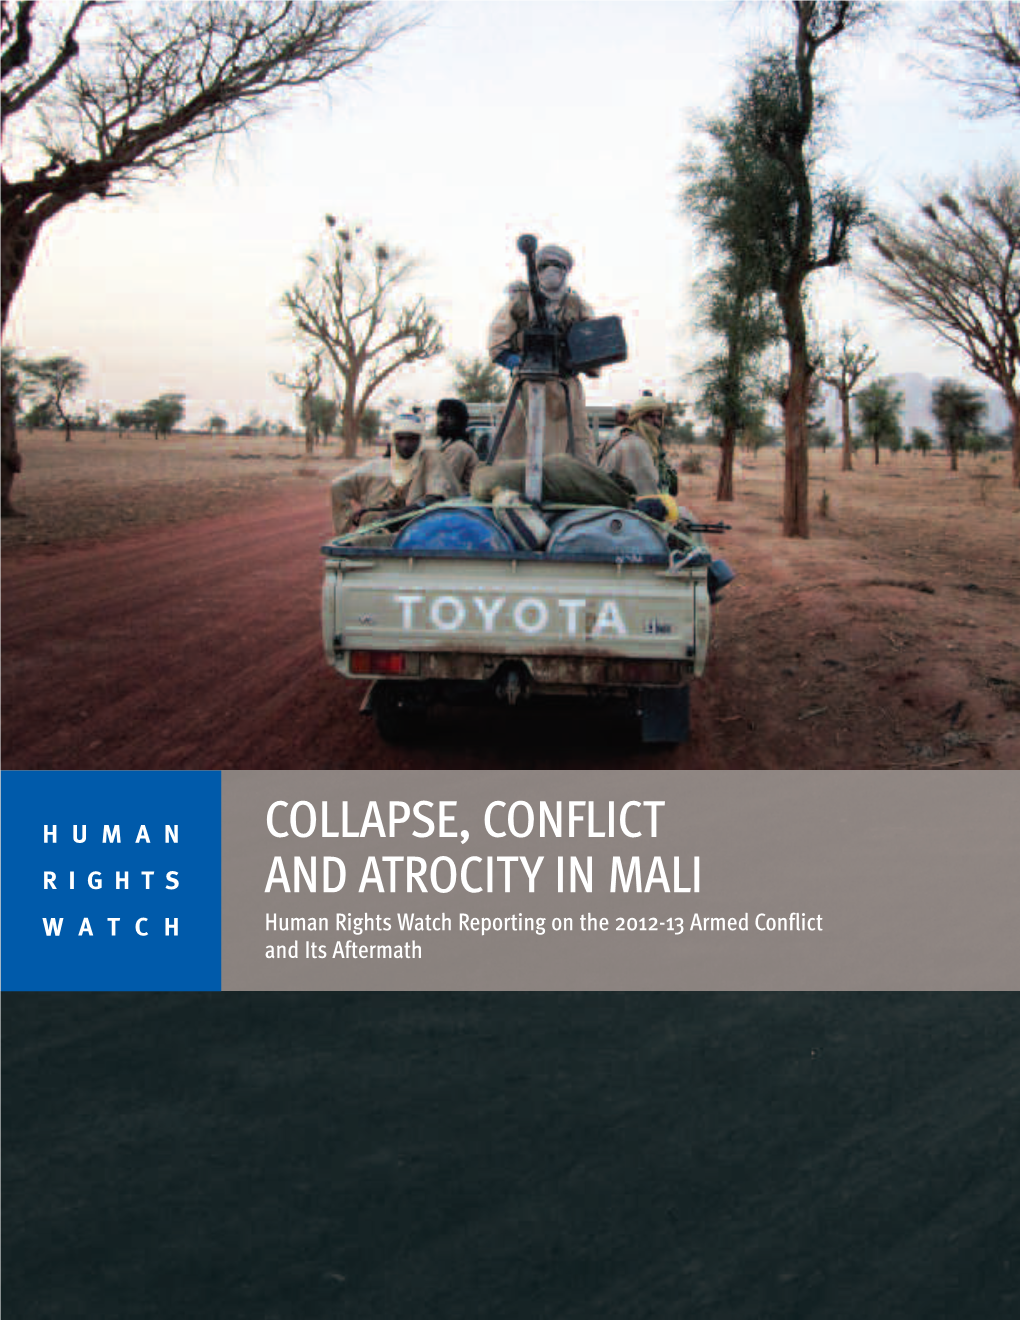 Human Rights Watch Reporting on the 2012-13 Armed Conflict and Its Aftermath